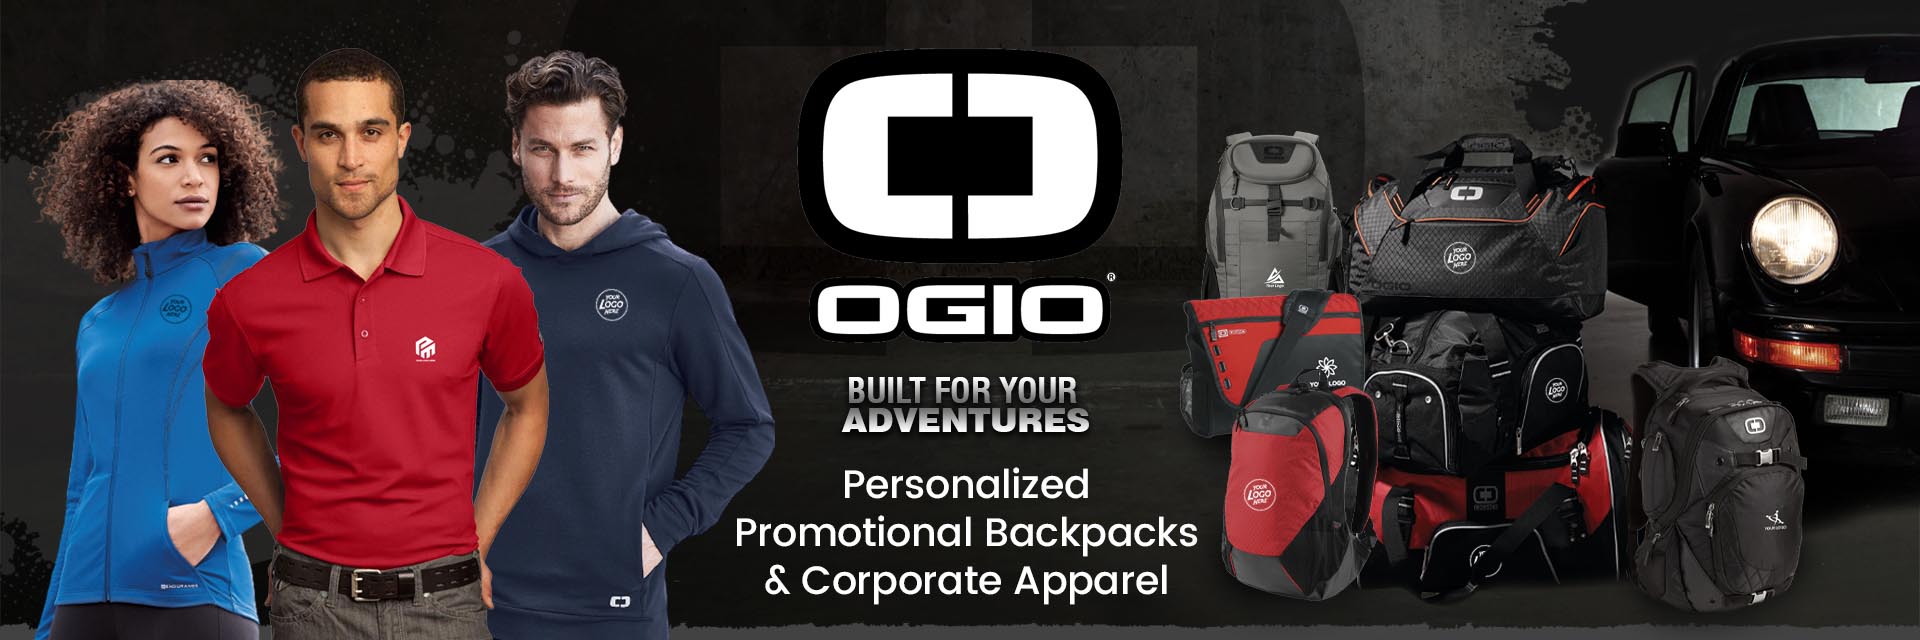 https://www.a2zclothing.com/custom-ogio-backpacks-and-corporate-apparel